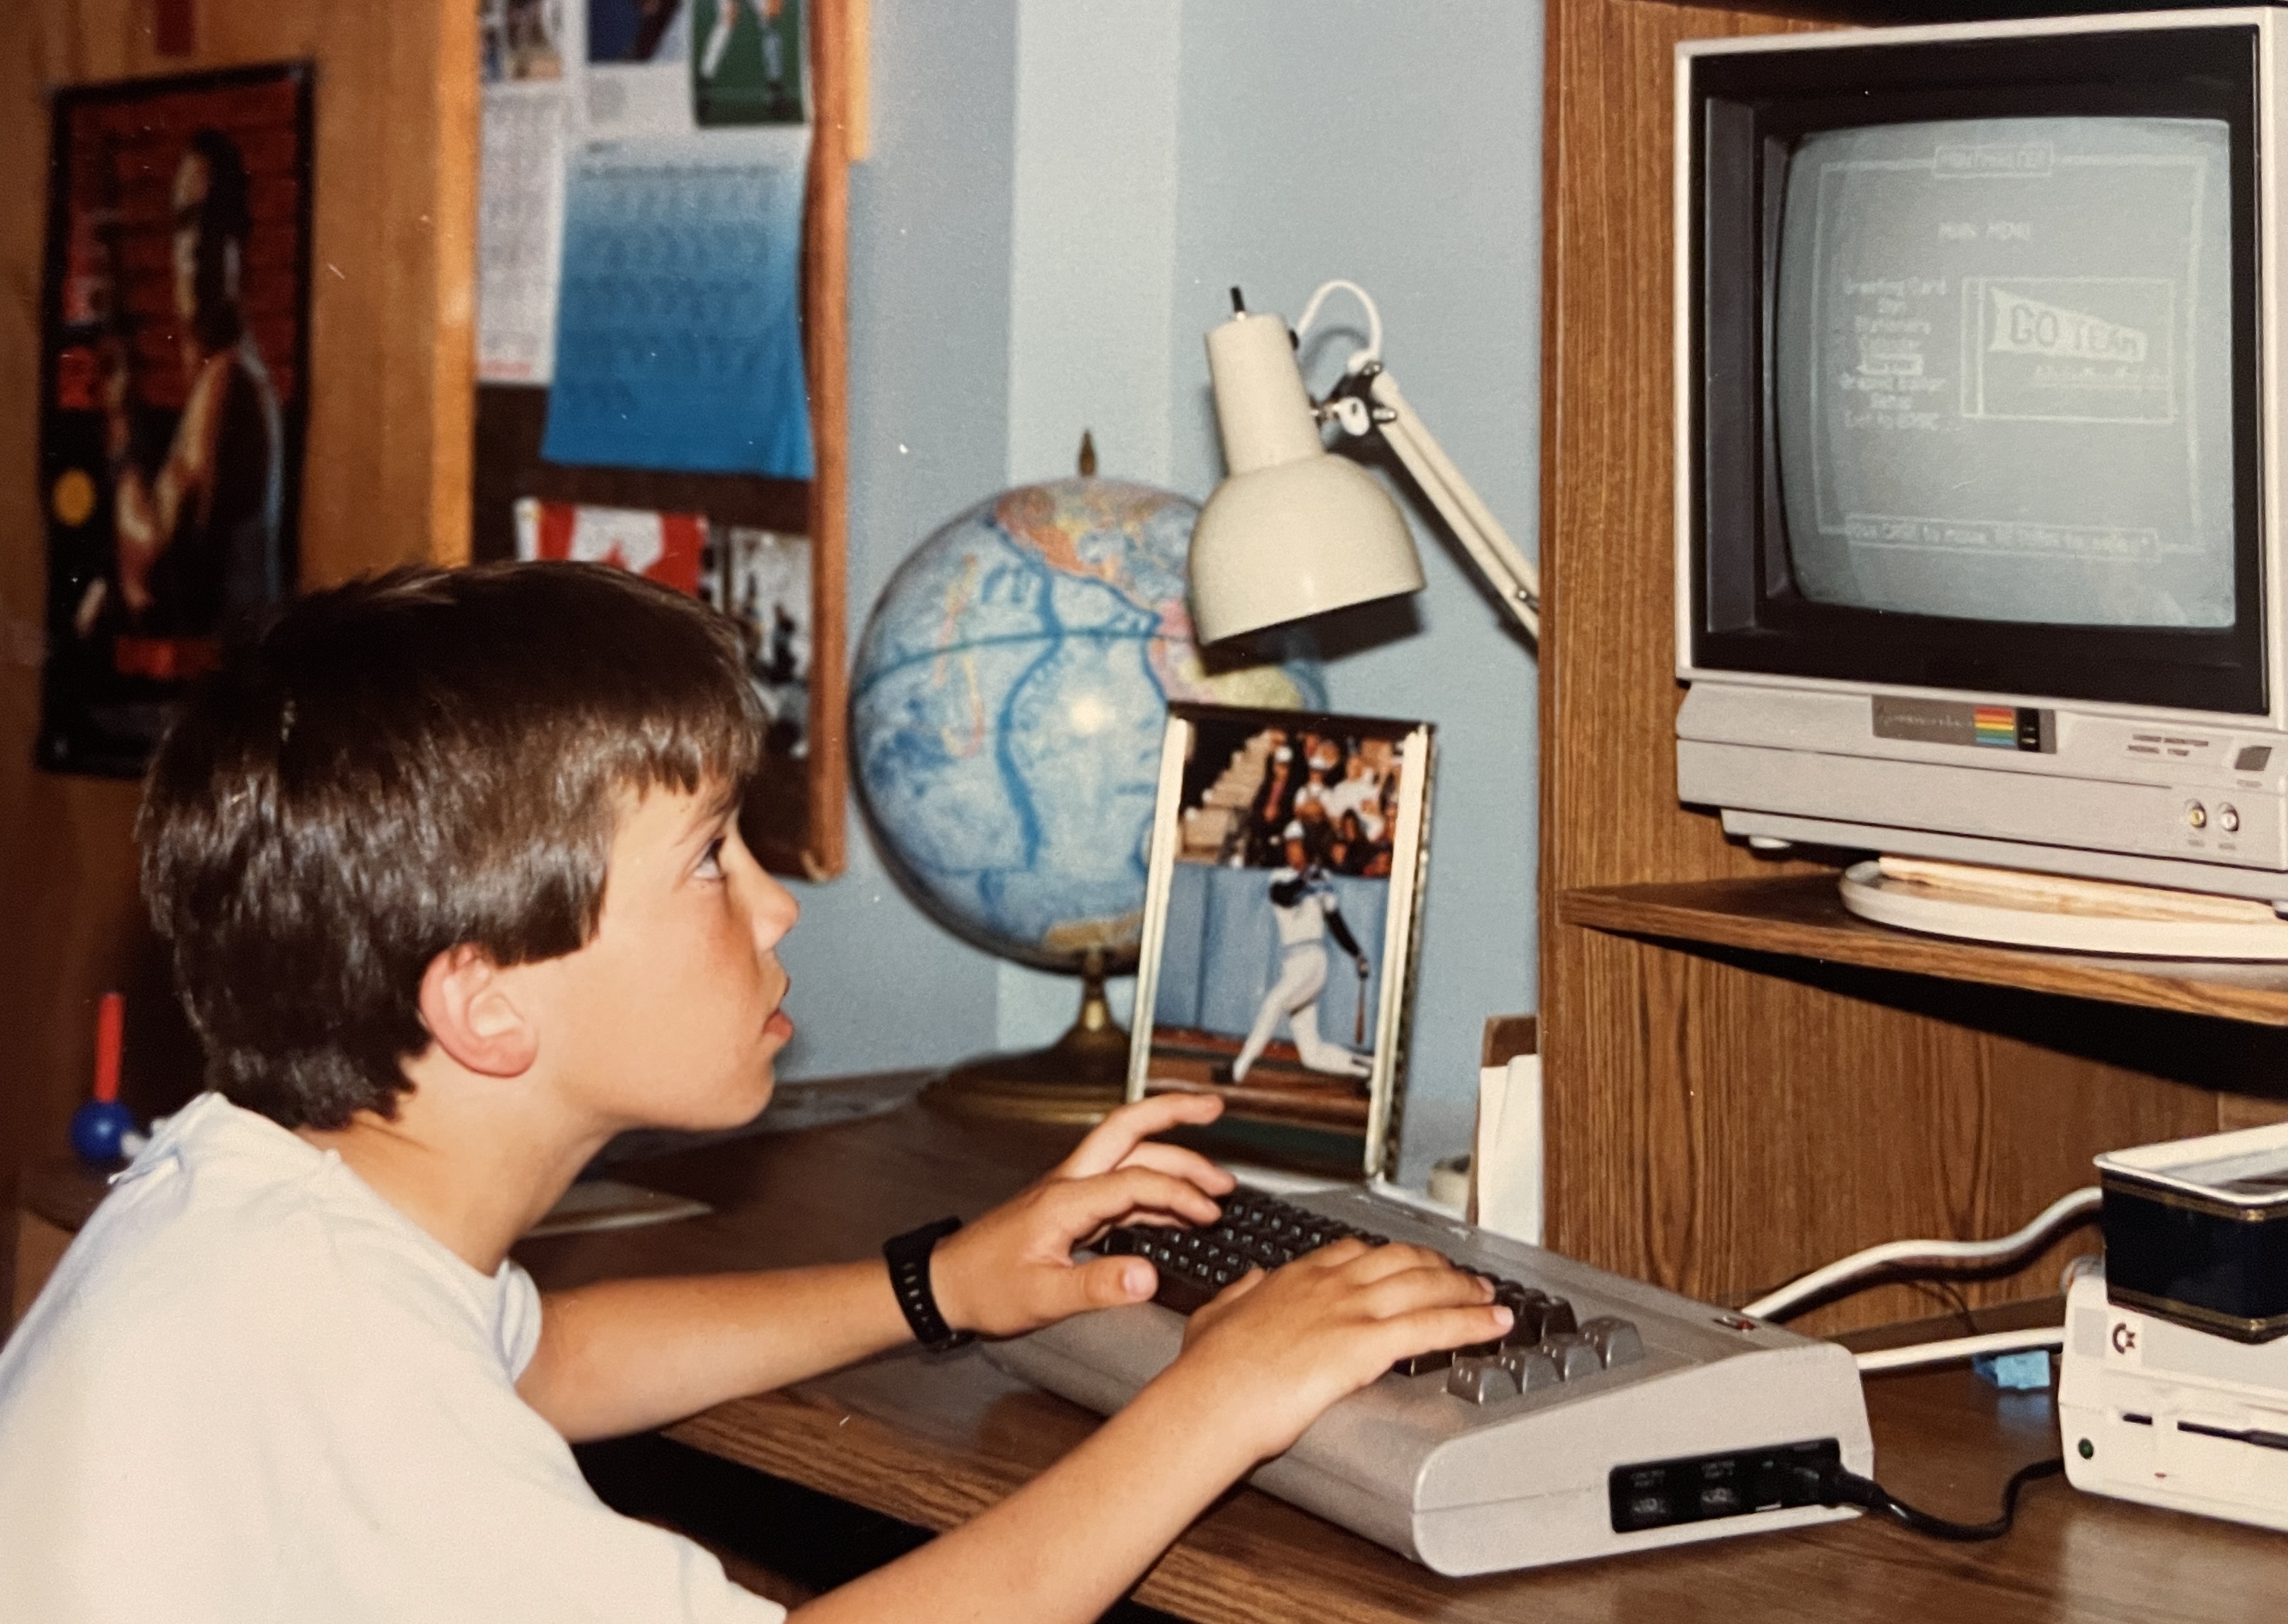 Dave Bullock, Vice President of Innovation at RWDI Ventures, on his computer as a child